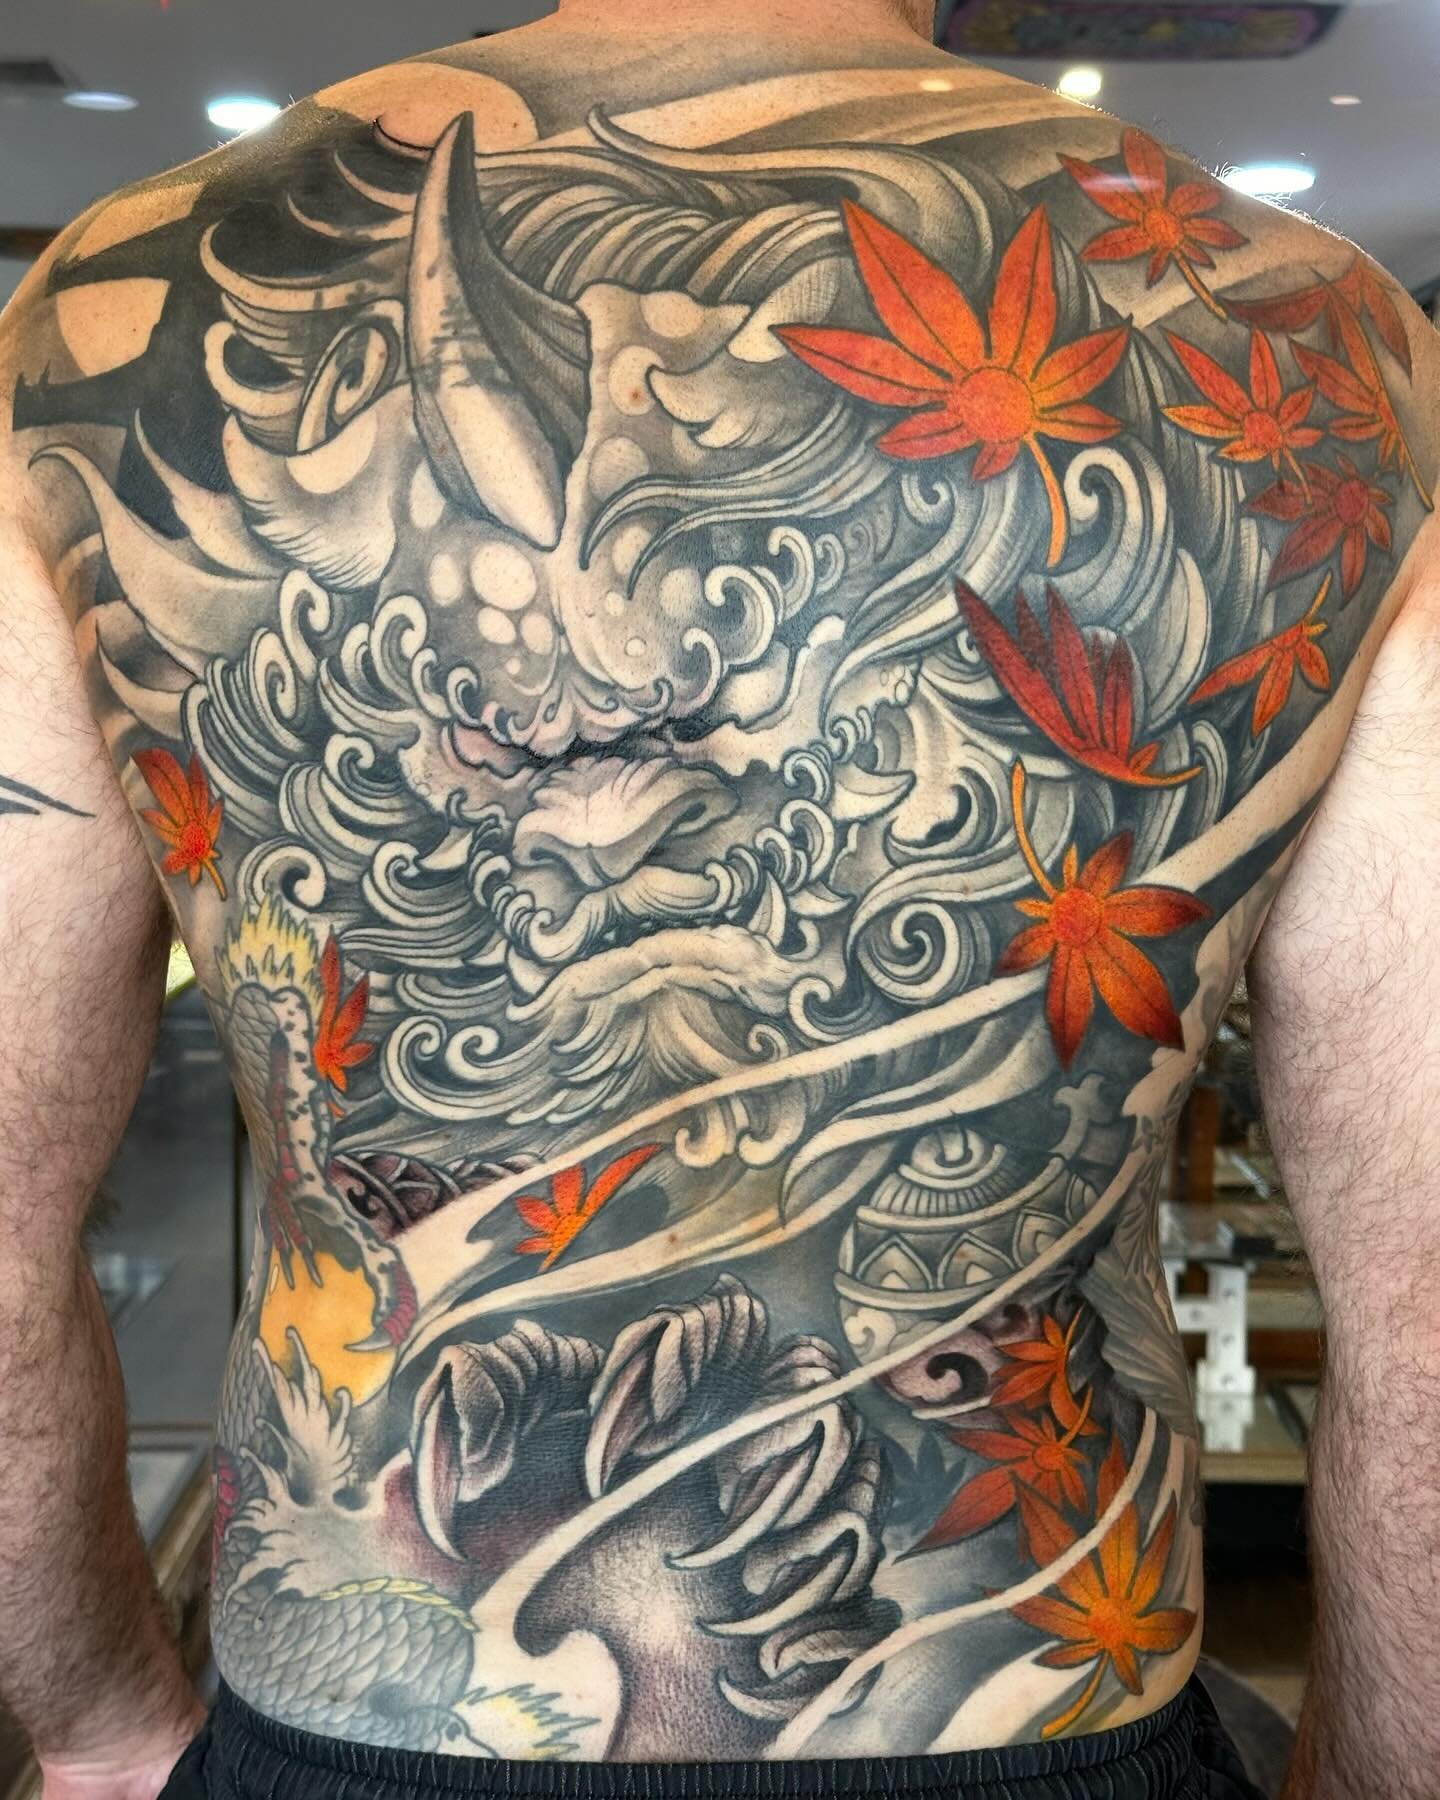 Big back piece by Raul! @_thelineandtheshade_ 
To get in contact with Raul, please message him directly, message the shop or call 07 5648 0626.
&bull;
&bull;
&bull;
&bull;
&bull;
#new #fyp #tradtattoo #goldcoast #goldcoasttattoo #visitgoldcoast #tatt